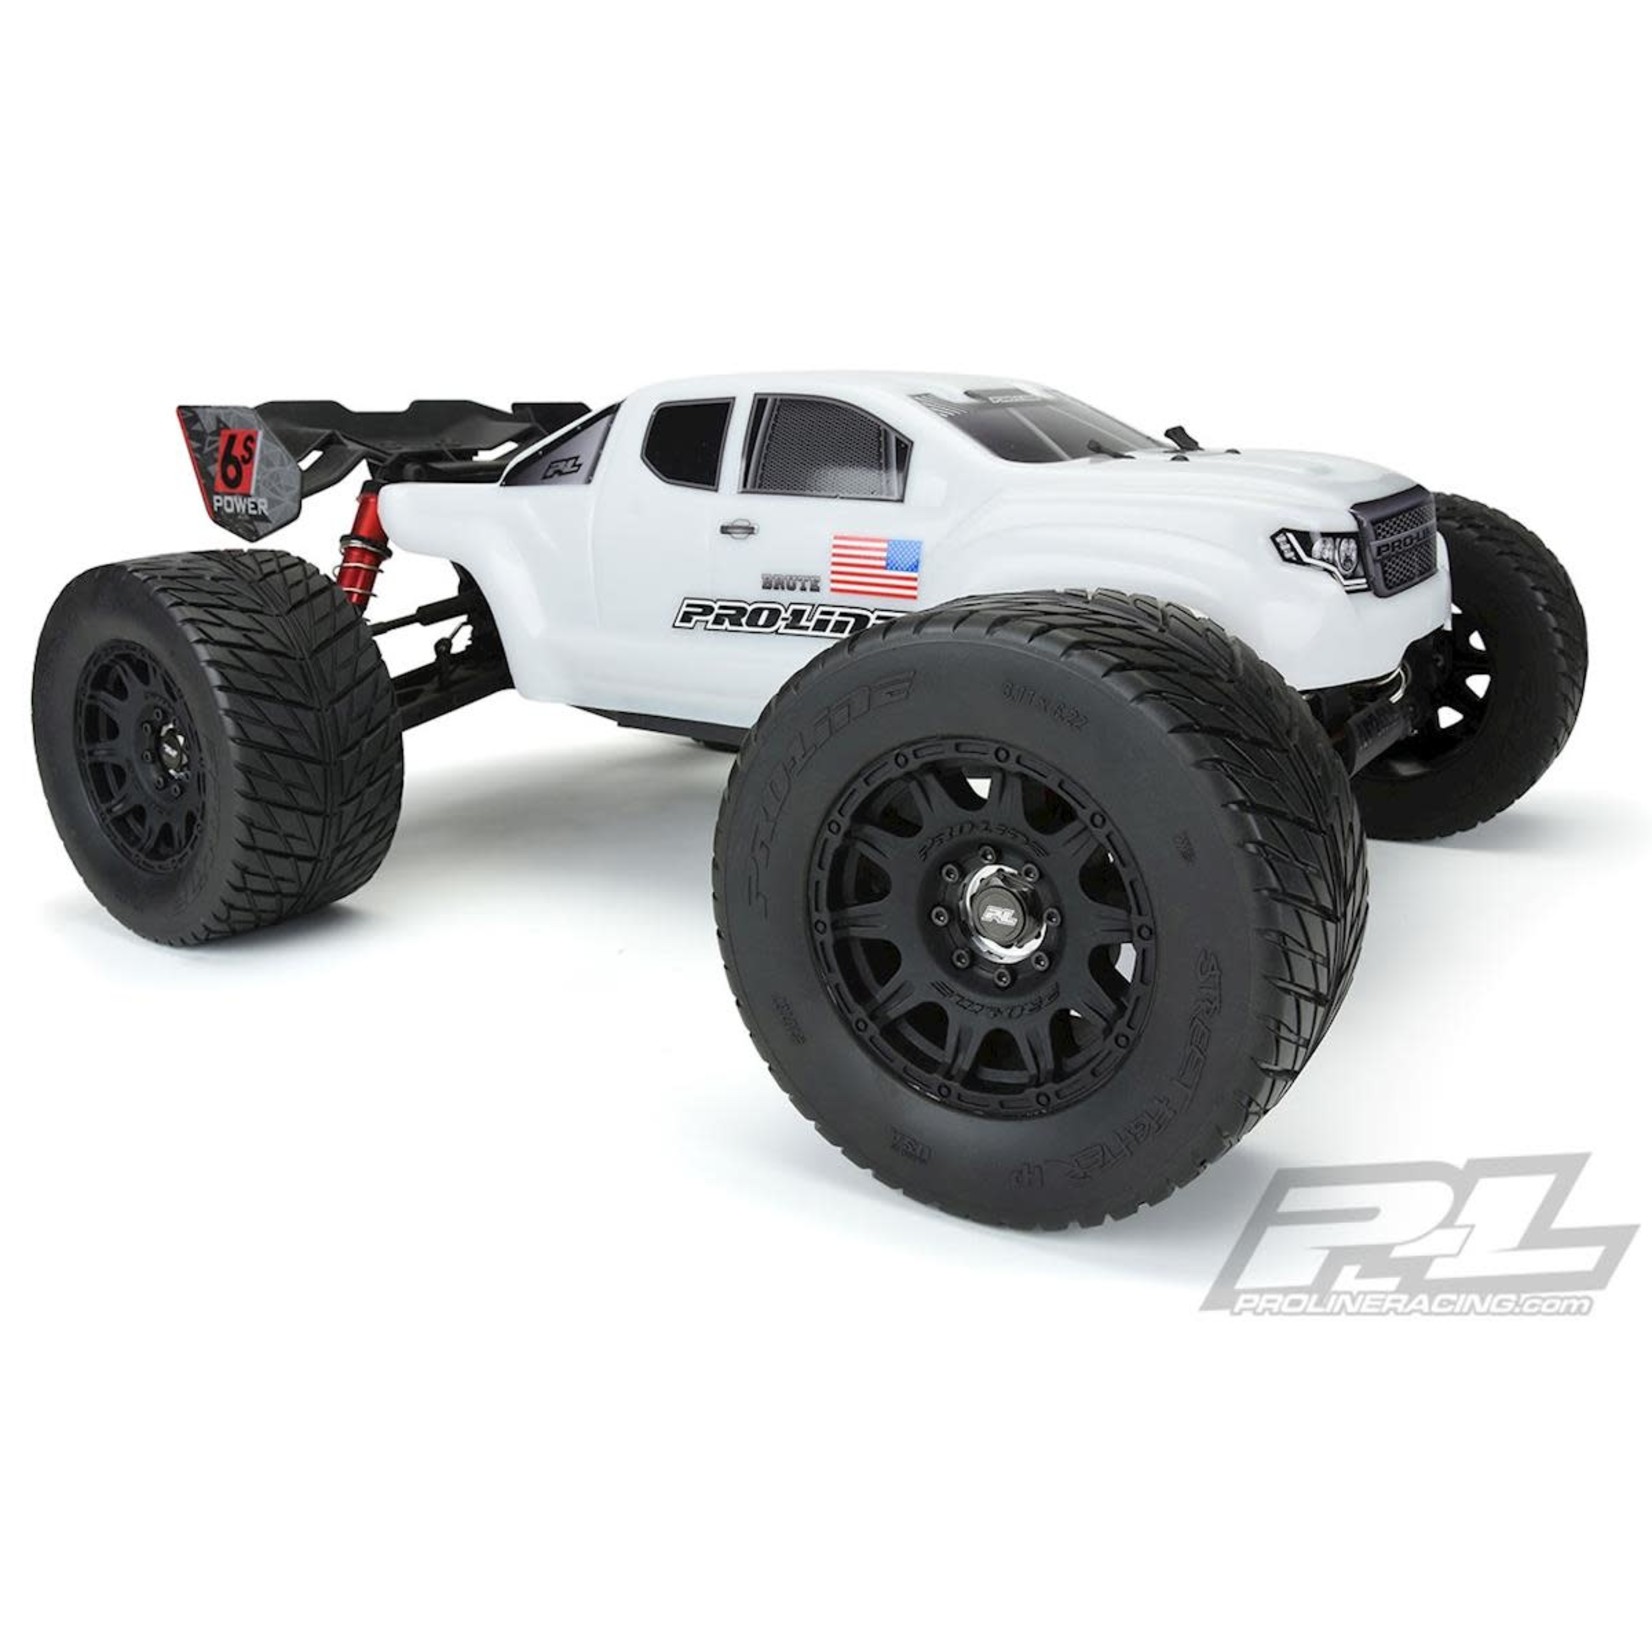 Pro-Line Pro-Line Street Fighter HP 3.8" Belted Tires Pre-Mounted w/Raid Wheels (2) (M2) #10167-10